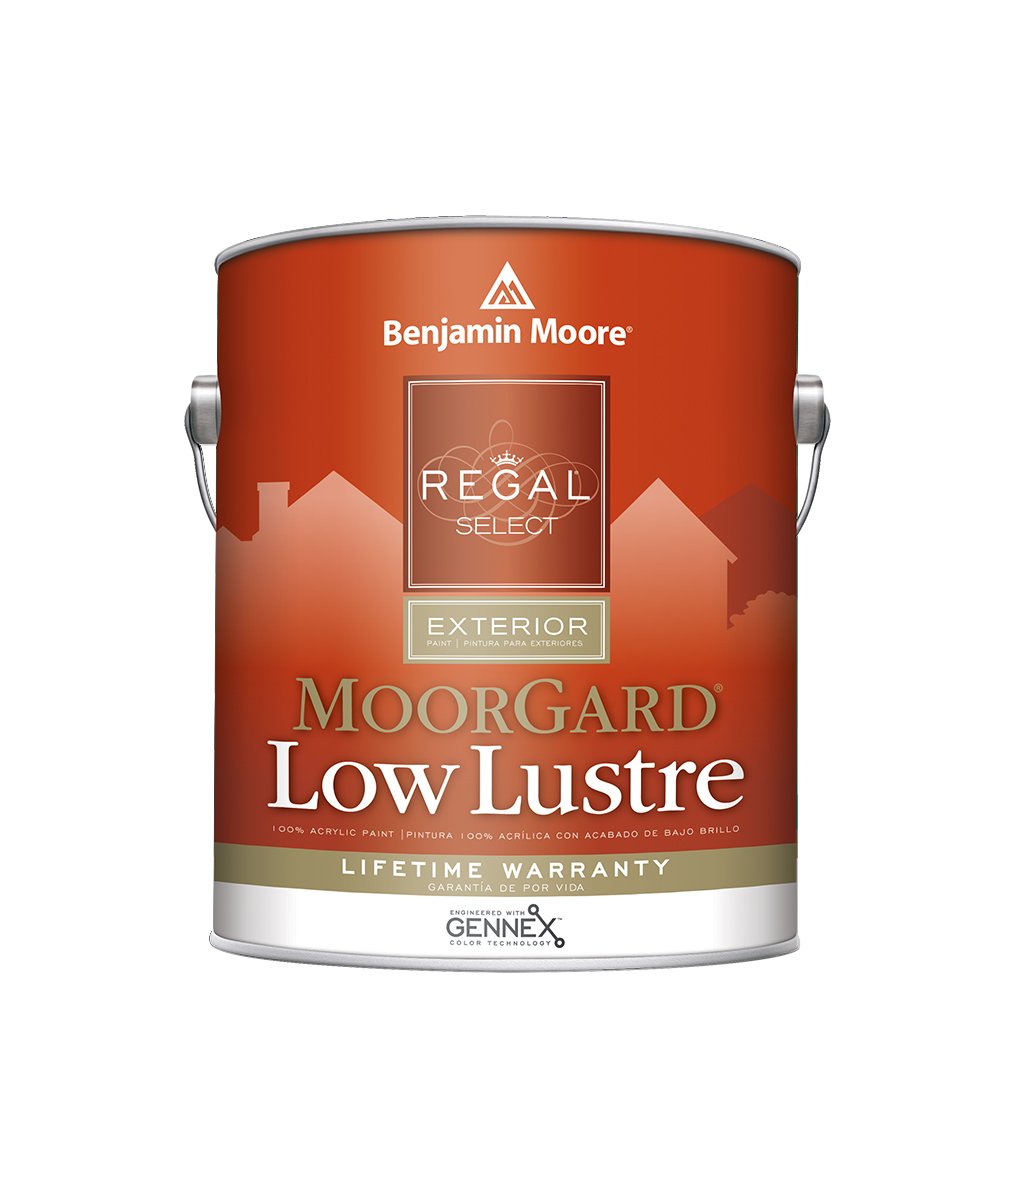 Benjamin Moore Regal Select Low Lustre Exterior Paint available at JC Licht